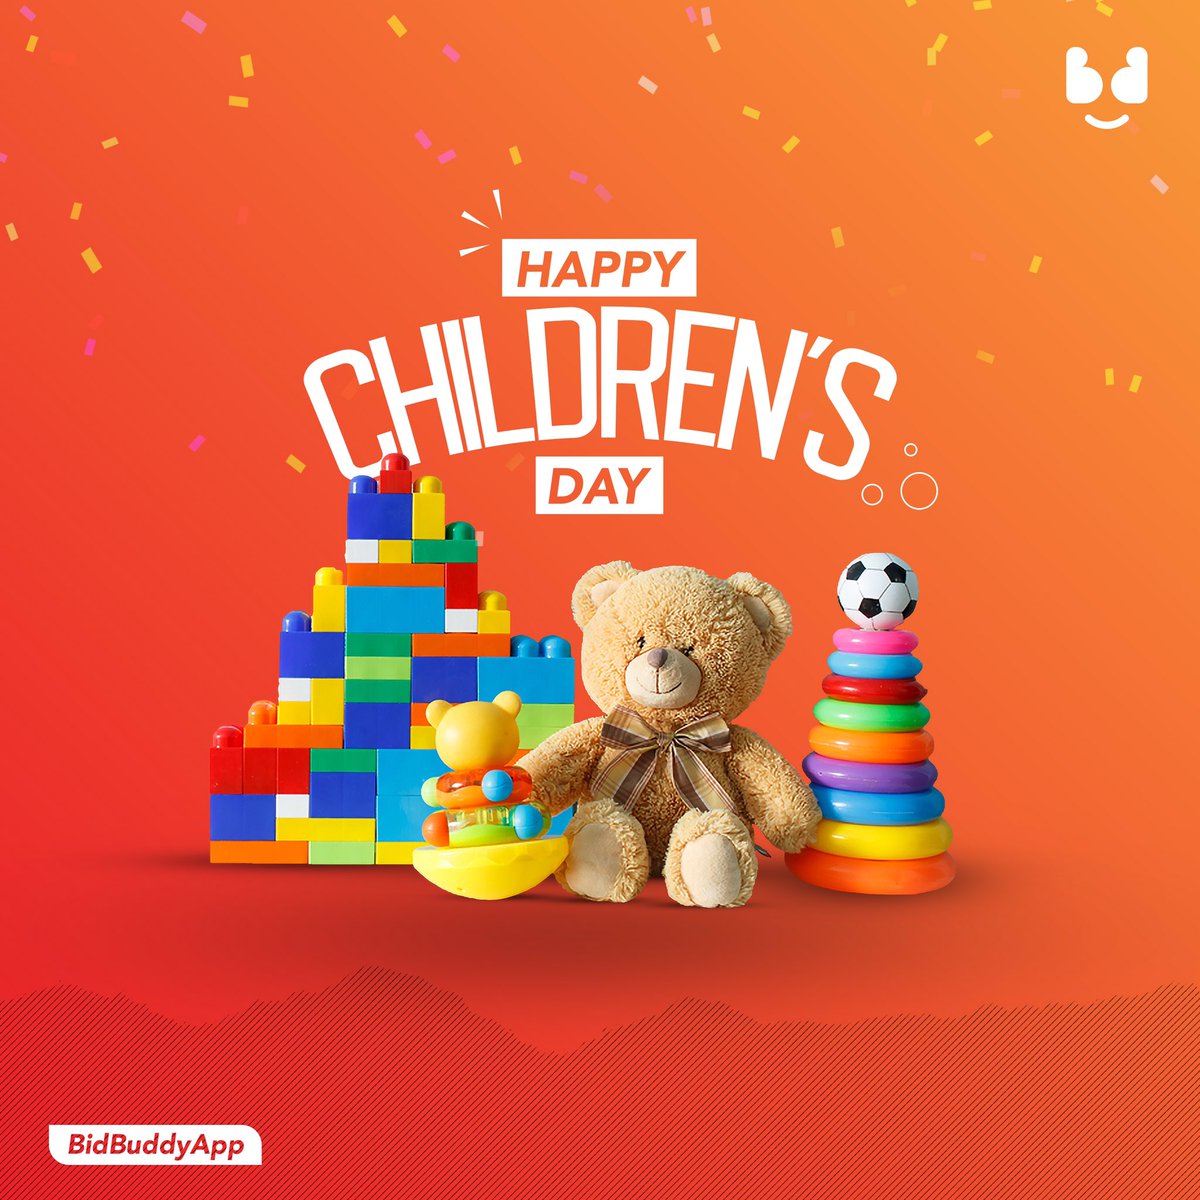 Happy Children’s Day!! ❤️❤️
Buy or Bid for quality children’s items on Bidbuddyapp at the cheapest prices available online! 🧸 🧸 

#happychildrensday 
#bidbuddyapp 
#cheapestpricesinthecountry 
#childrensitems